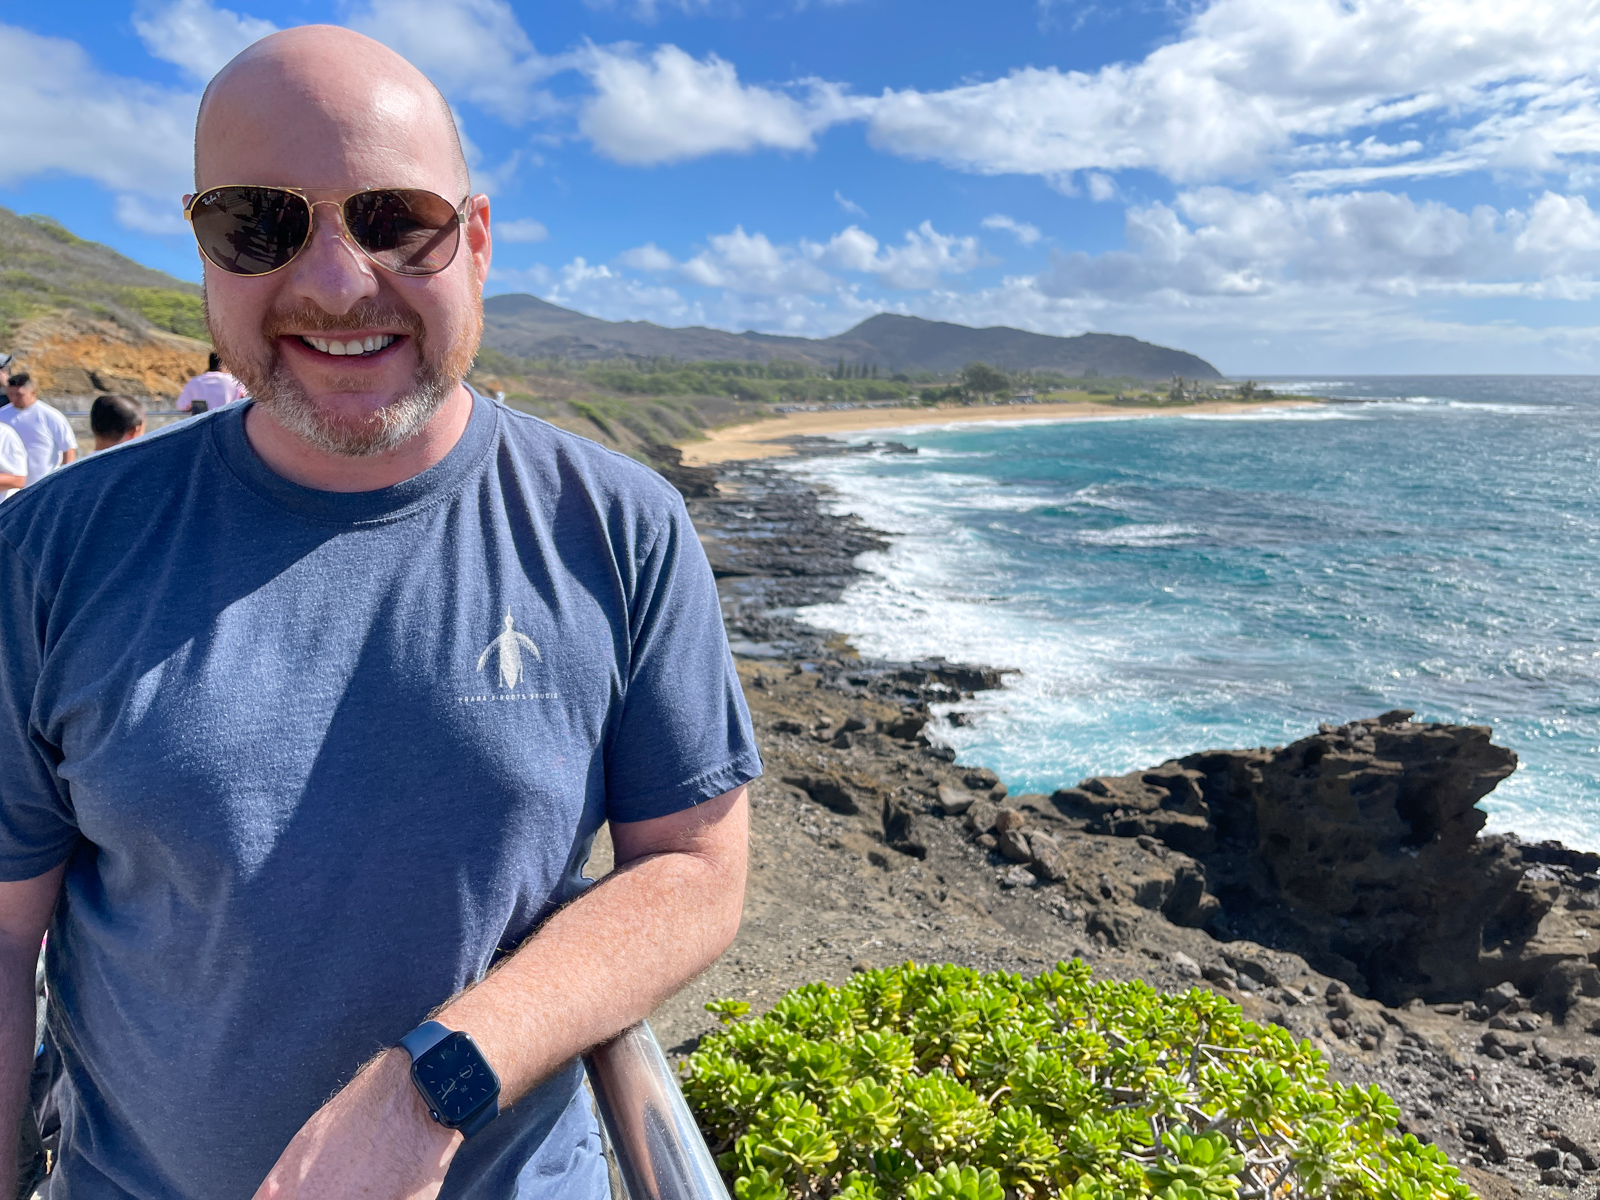 Dave on a scenic drive in Oahu, Hawaii